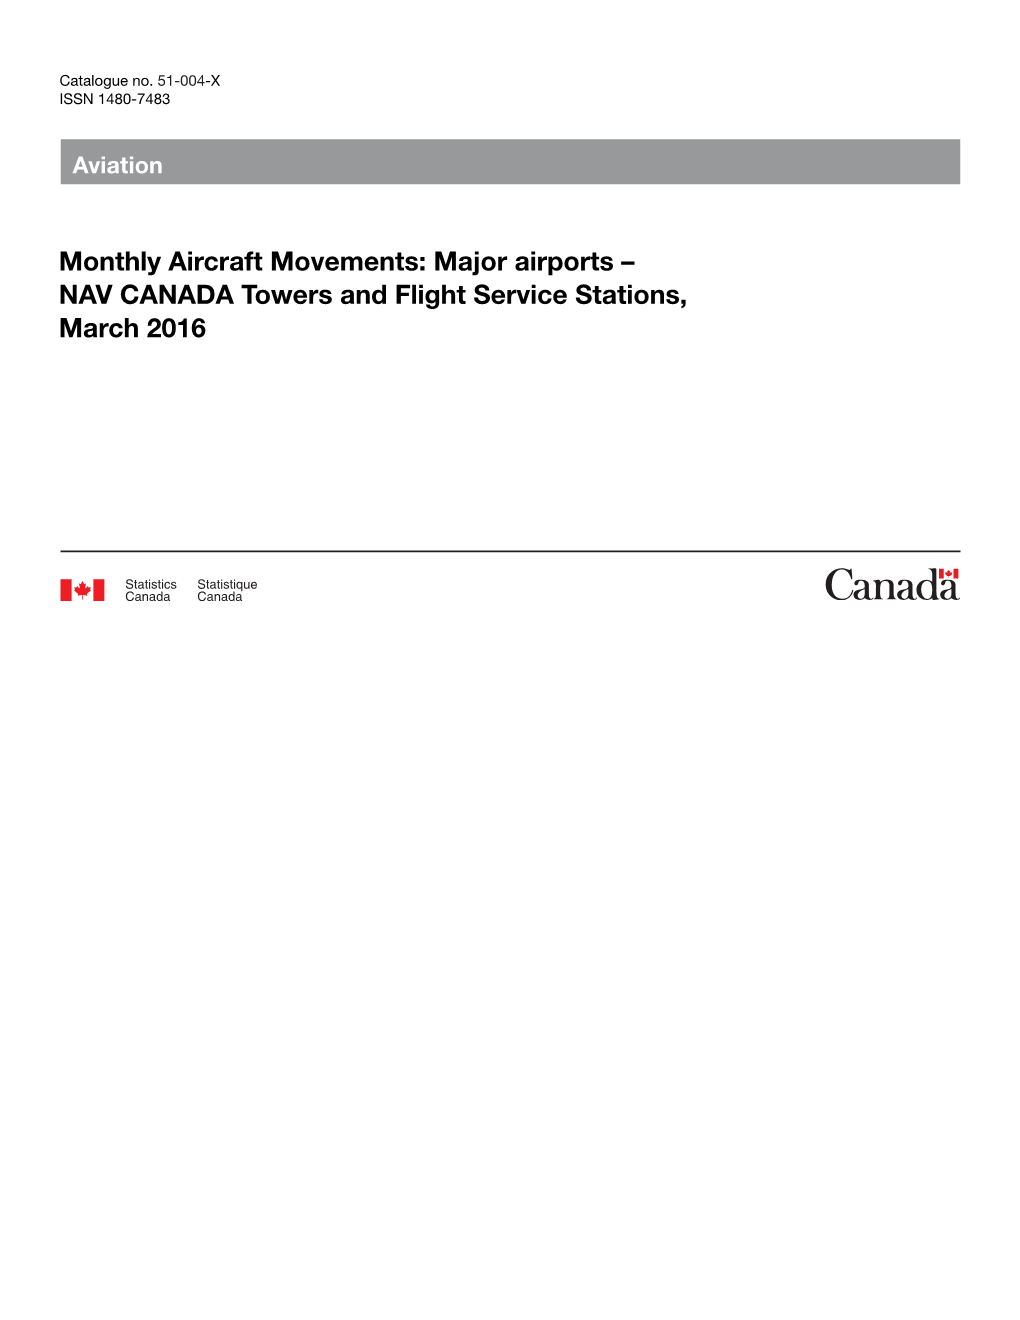 Monthly Aircraft Movements: Major Airports – NAV CANADA Towers and Flight Service Stations, March 2016